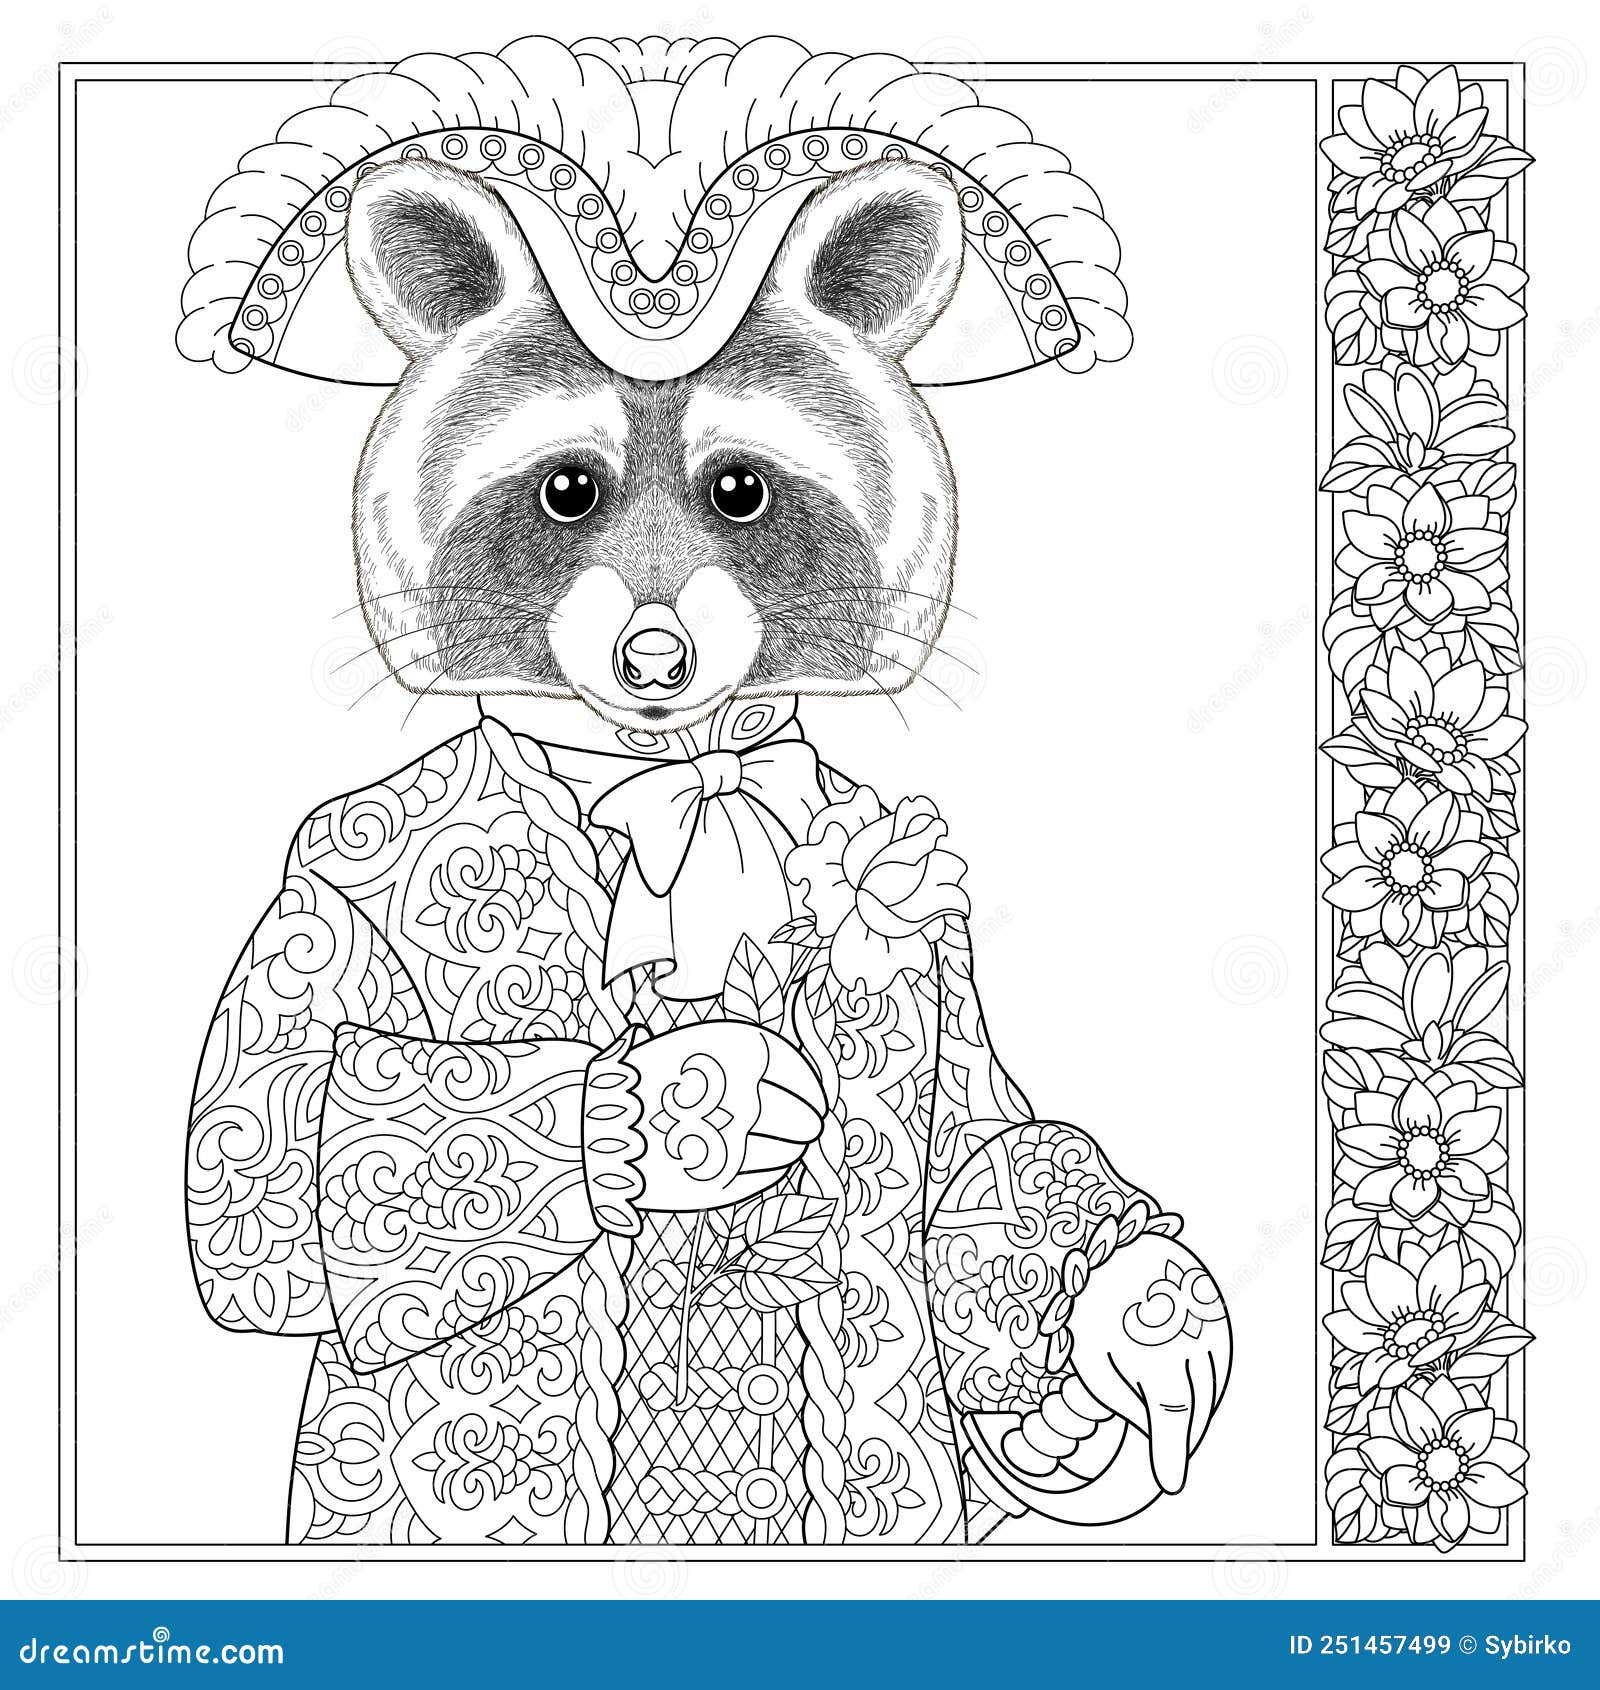 Raccoon coloring book page stock vector illustration of colouring